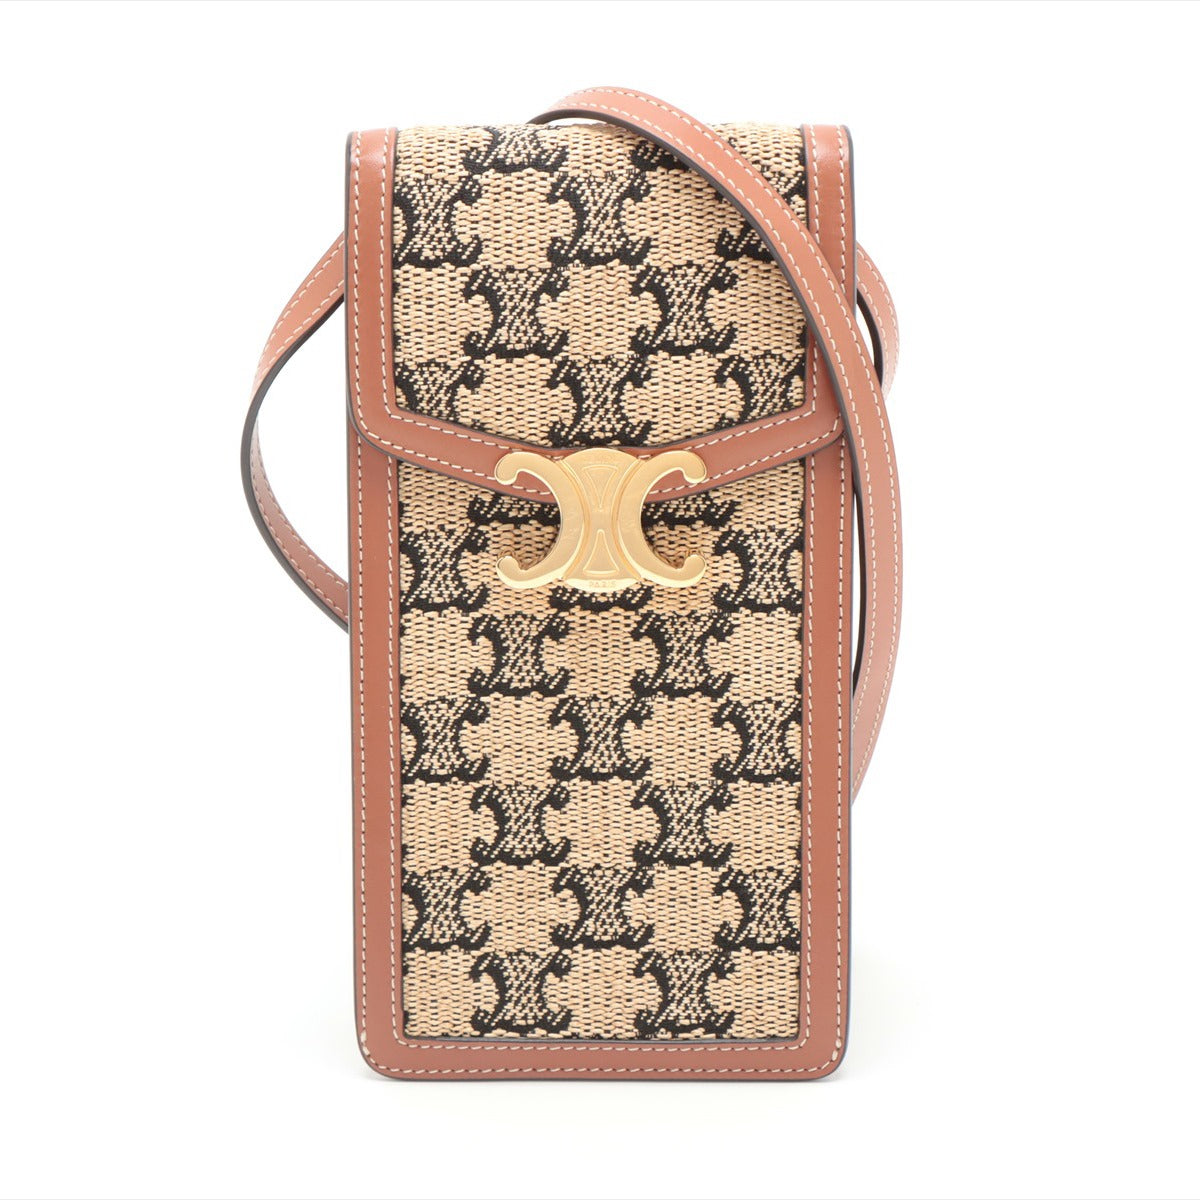 CELINE Triomphe Phone pouch Straw & leather Shoulder bag Beige